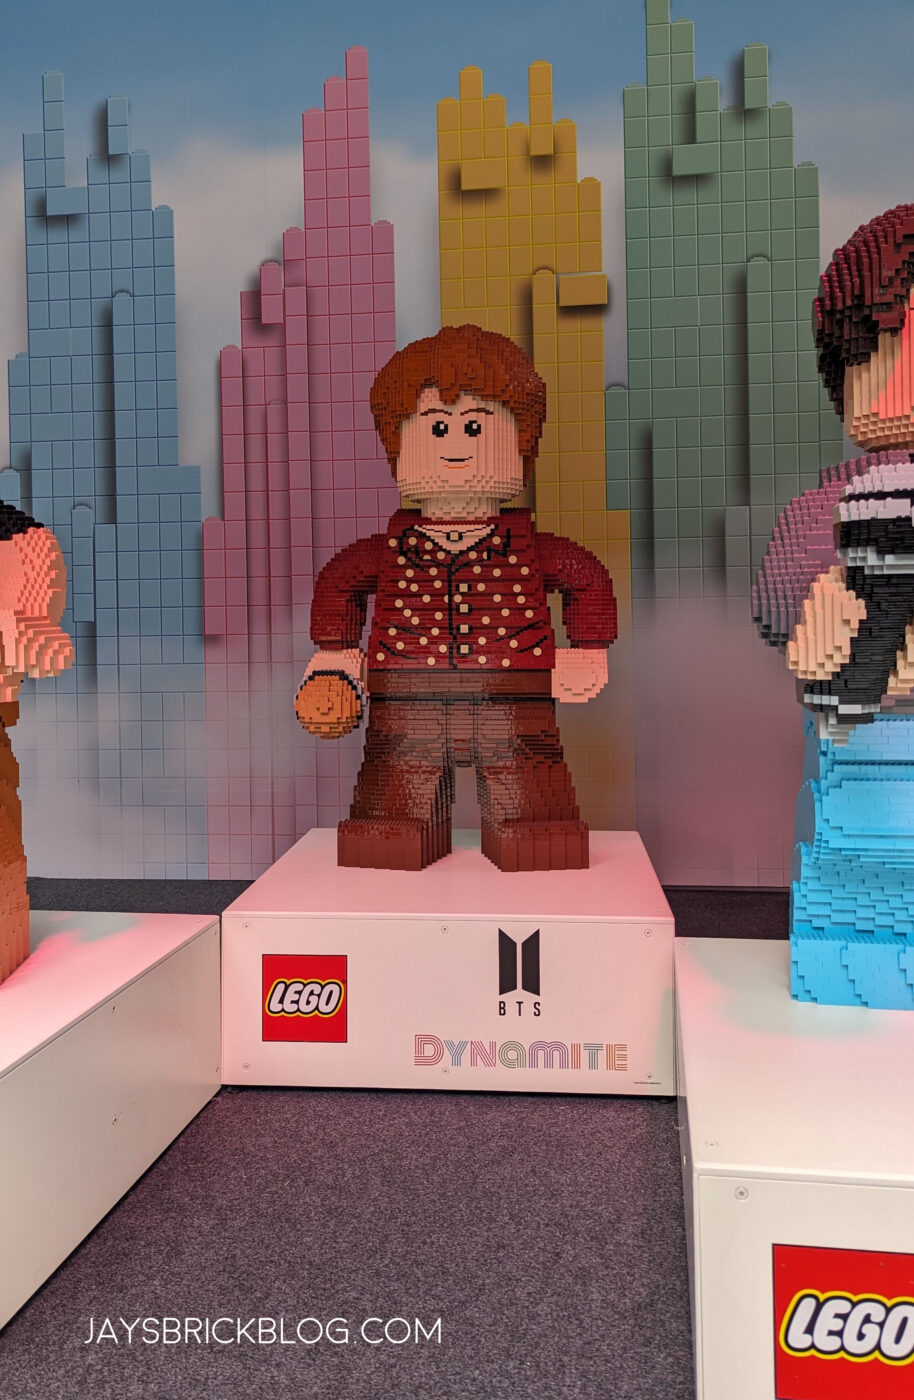 Here’s a look at the LEGO BTS Dynamite Pop-up at Orchard Road, Singapore33